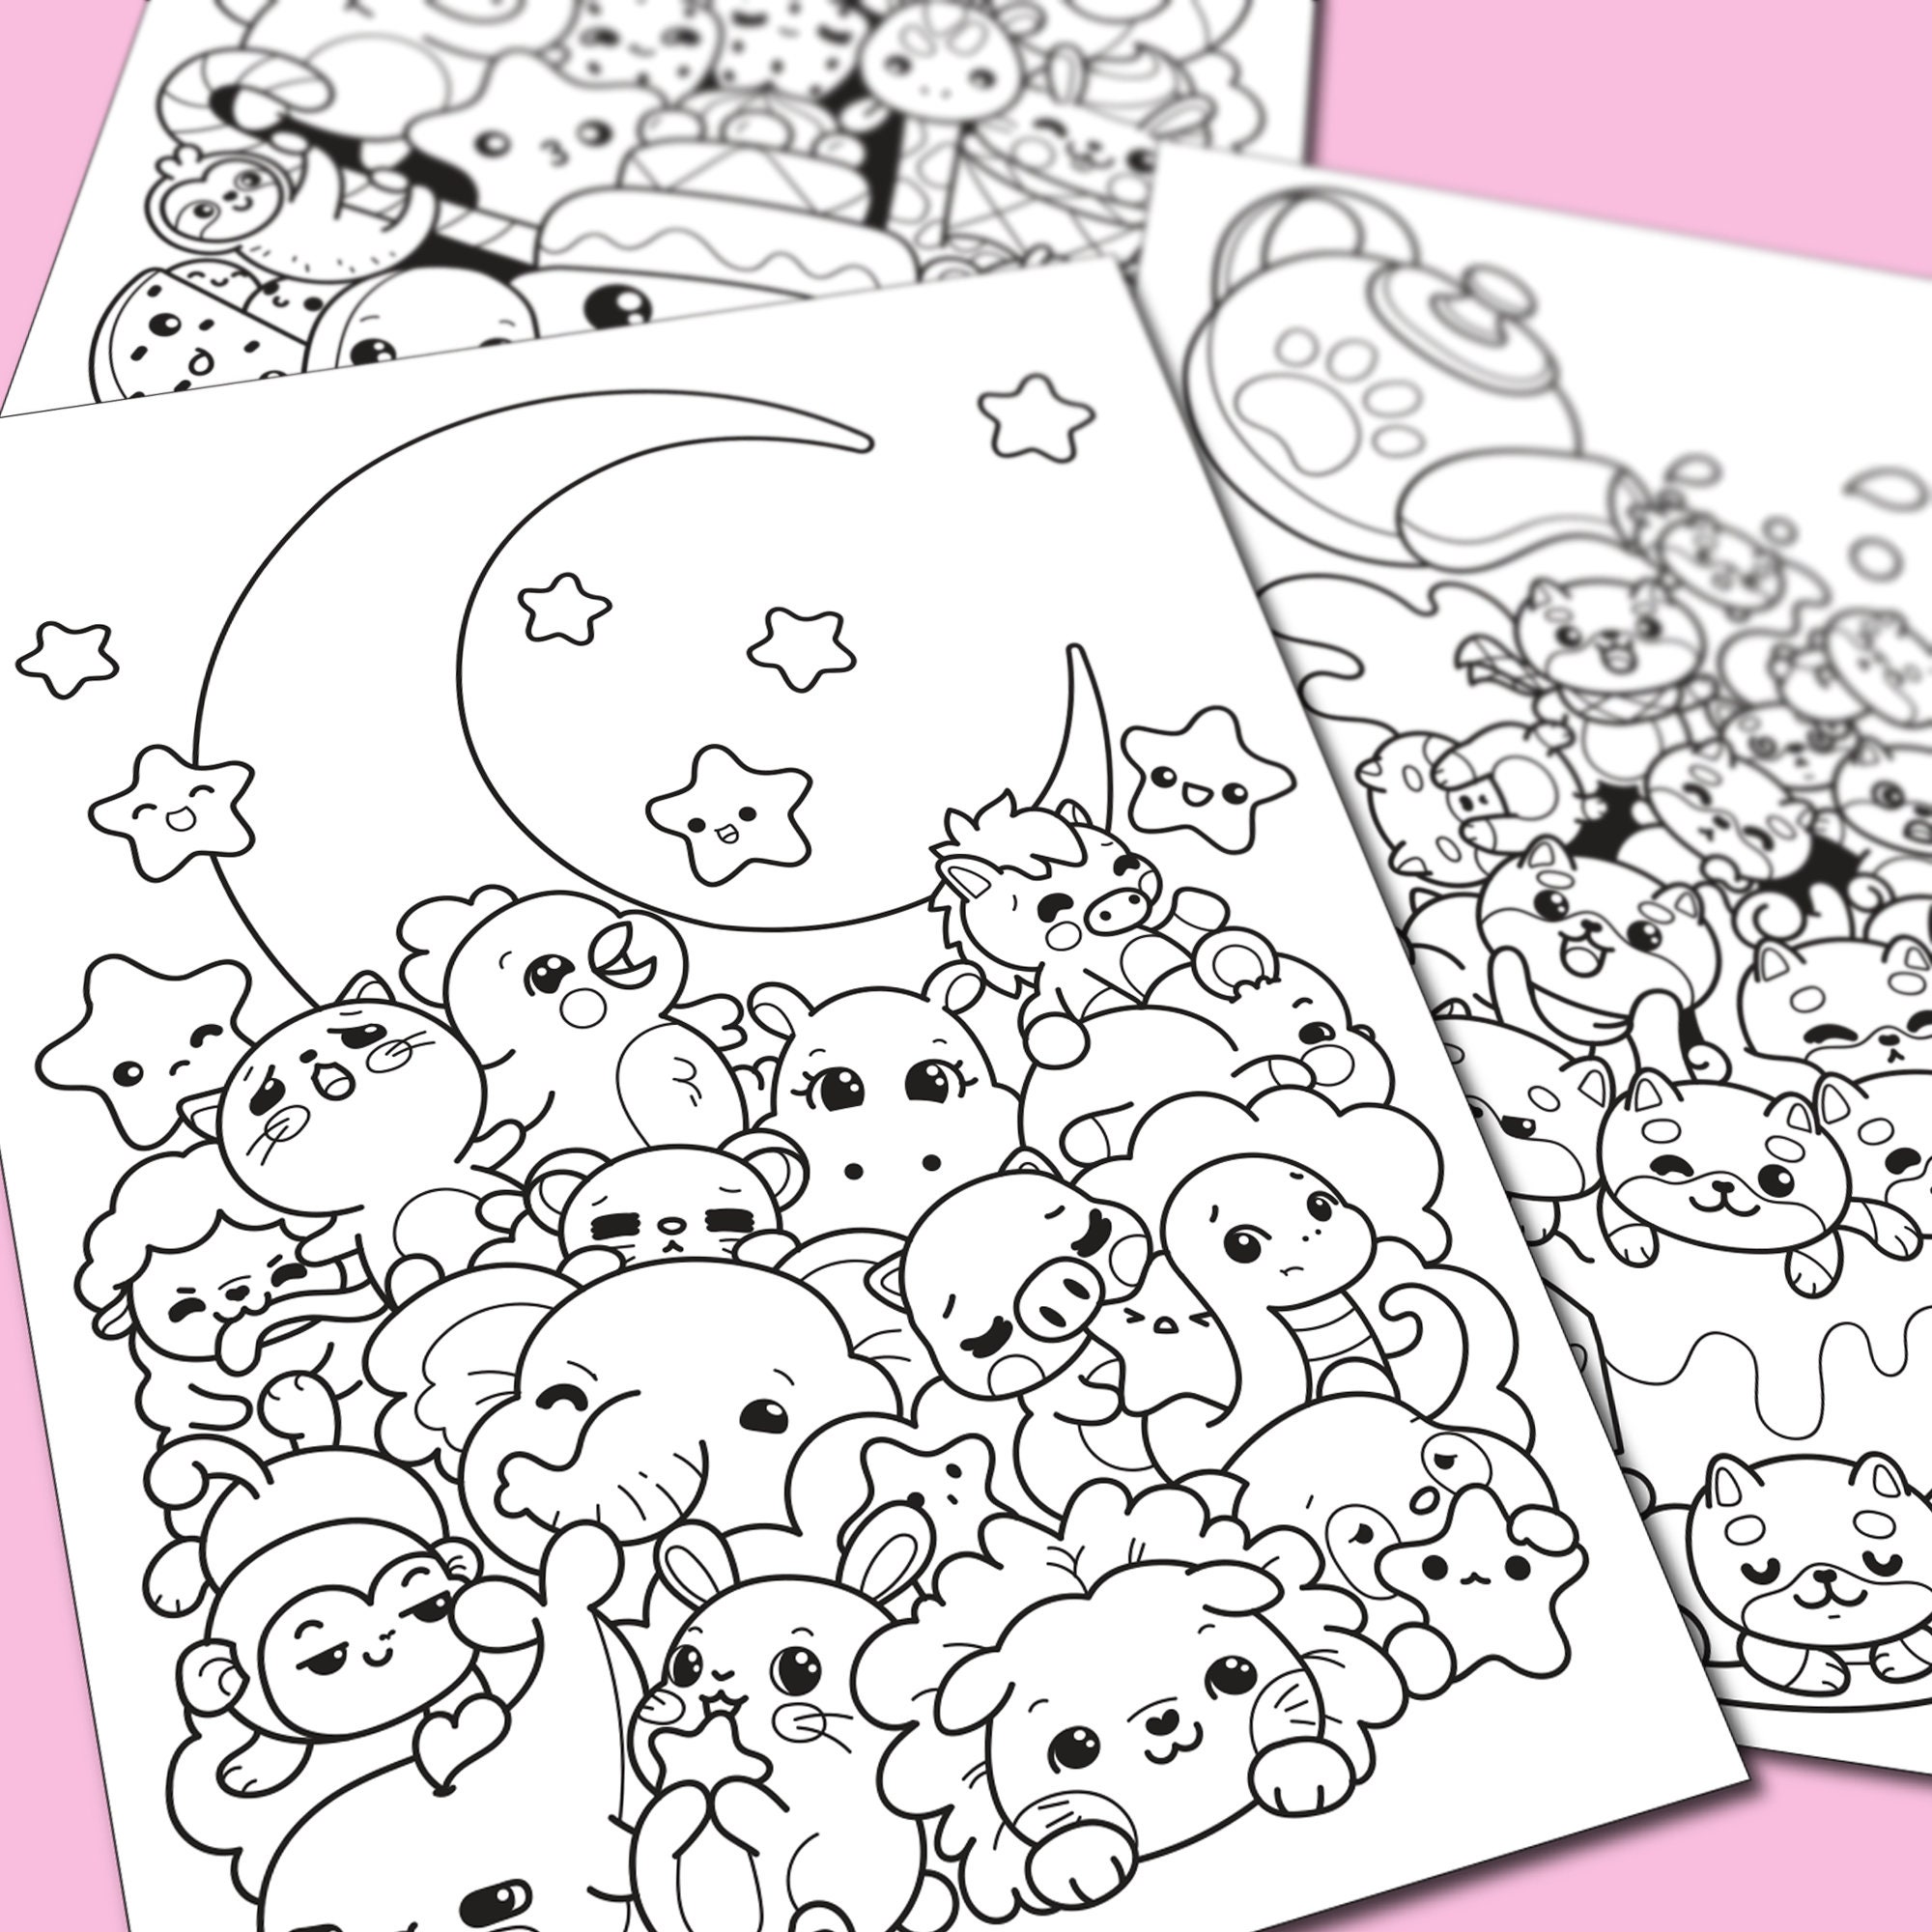 Doodle Art Coloring Book: Cute doodle art coloring book for adults and kids  with cute monsters and cool kawaii doodles coloring pages